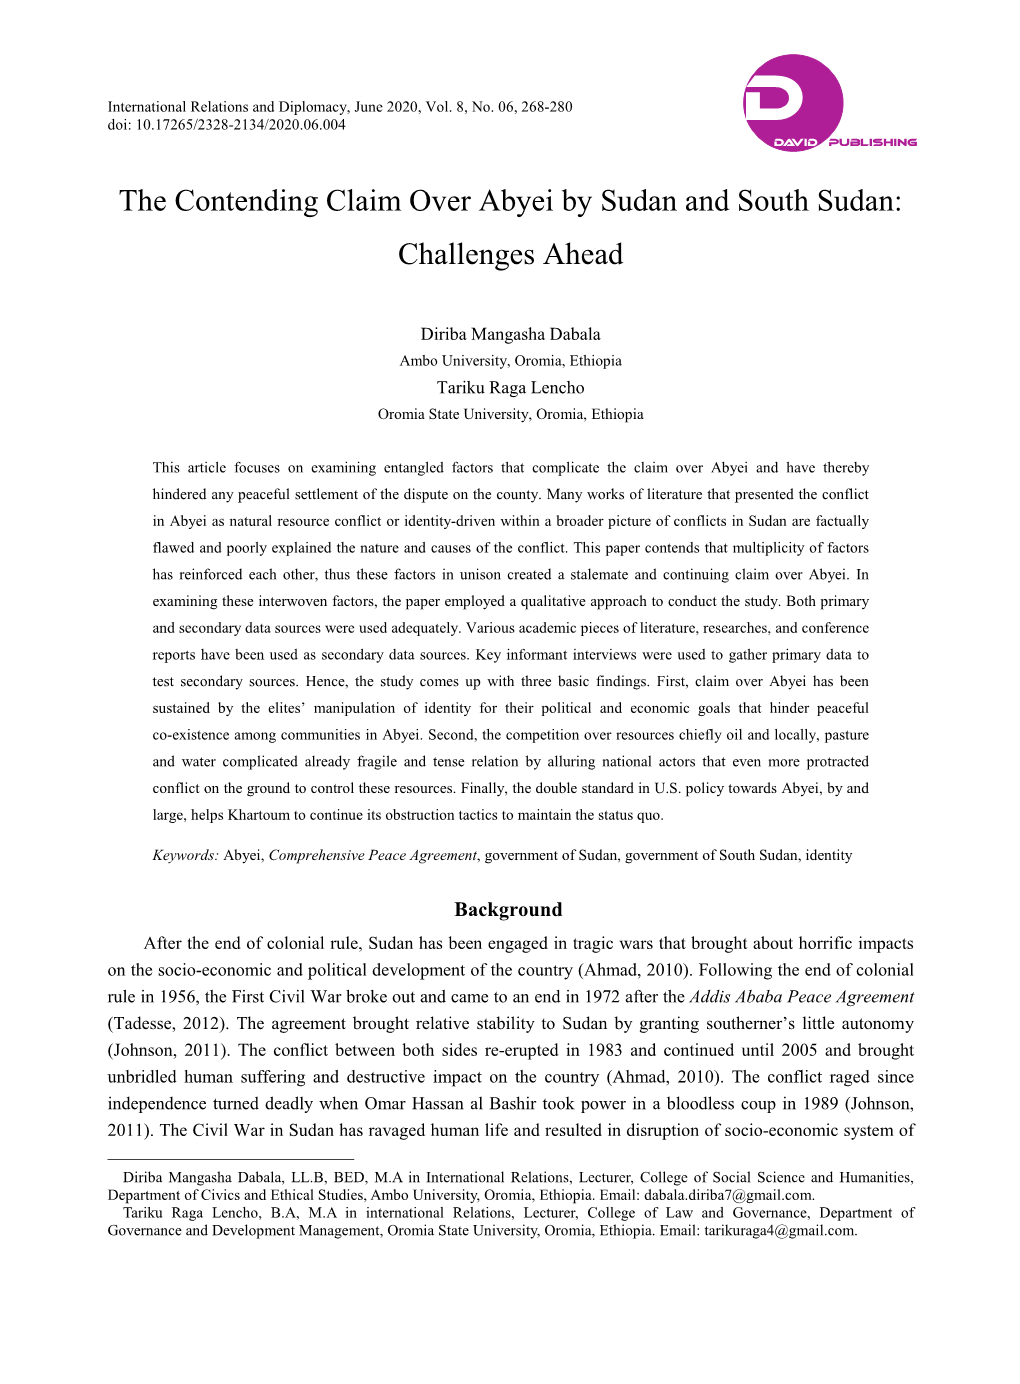 The Contending Claim Over Abyei by Sudan and South Sudan: Challenges Ahead